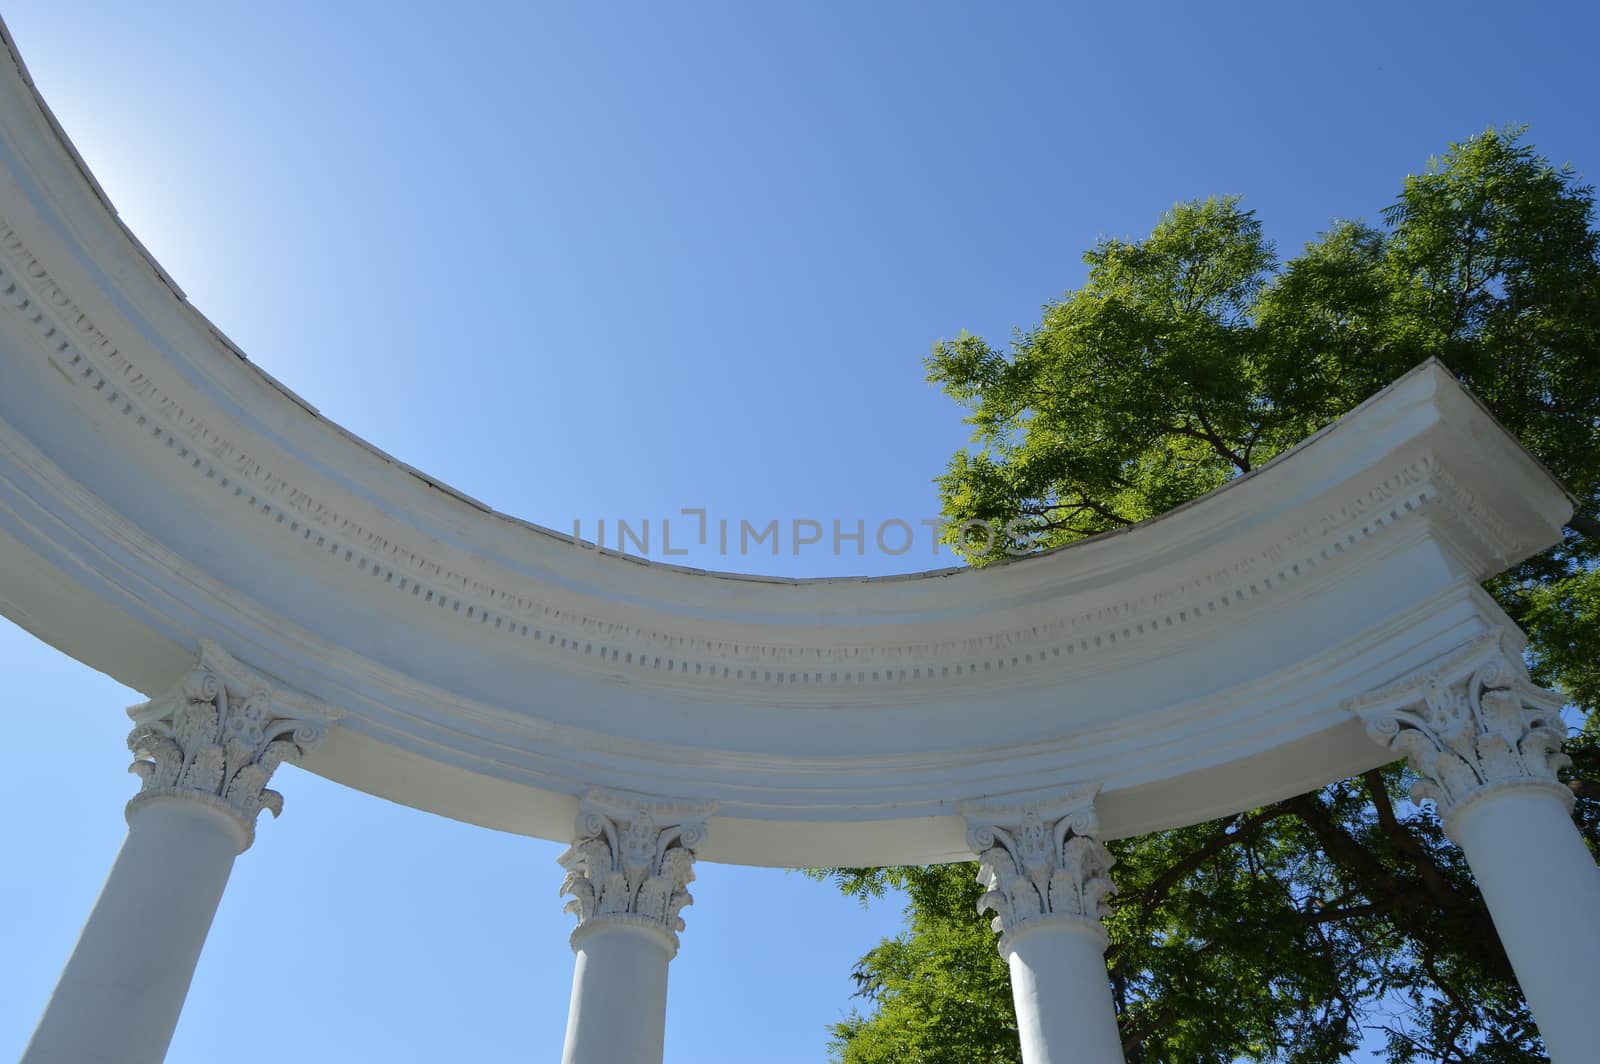 Part of a white rotunda with columns against a blue sky on a Sunny day.